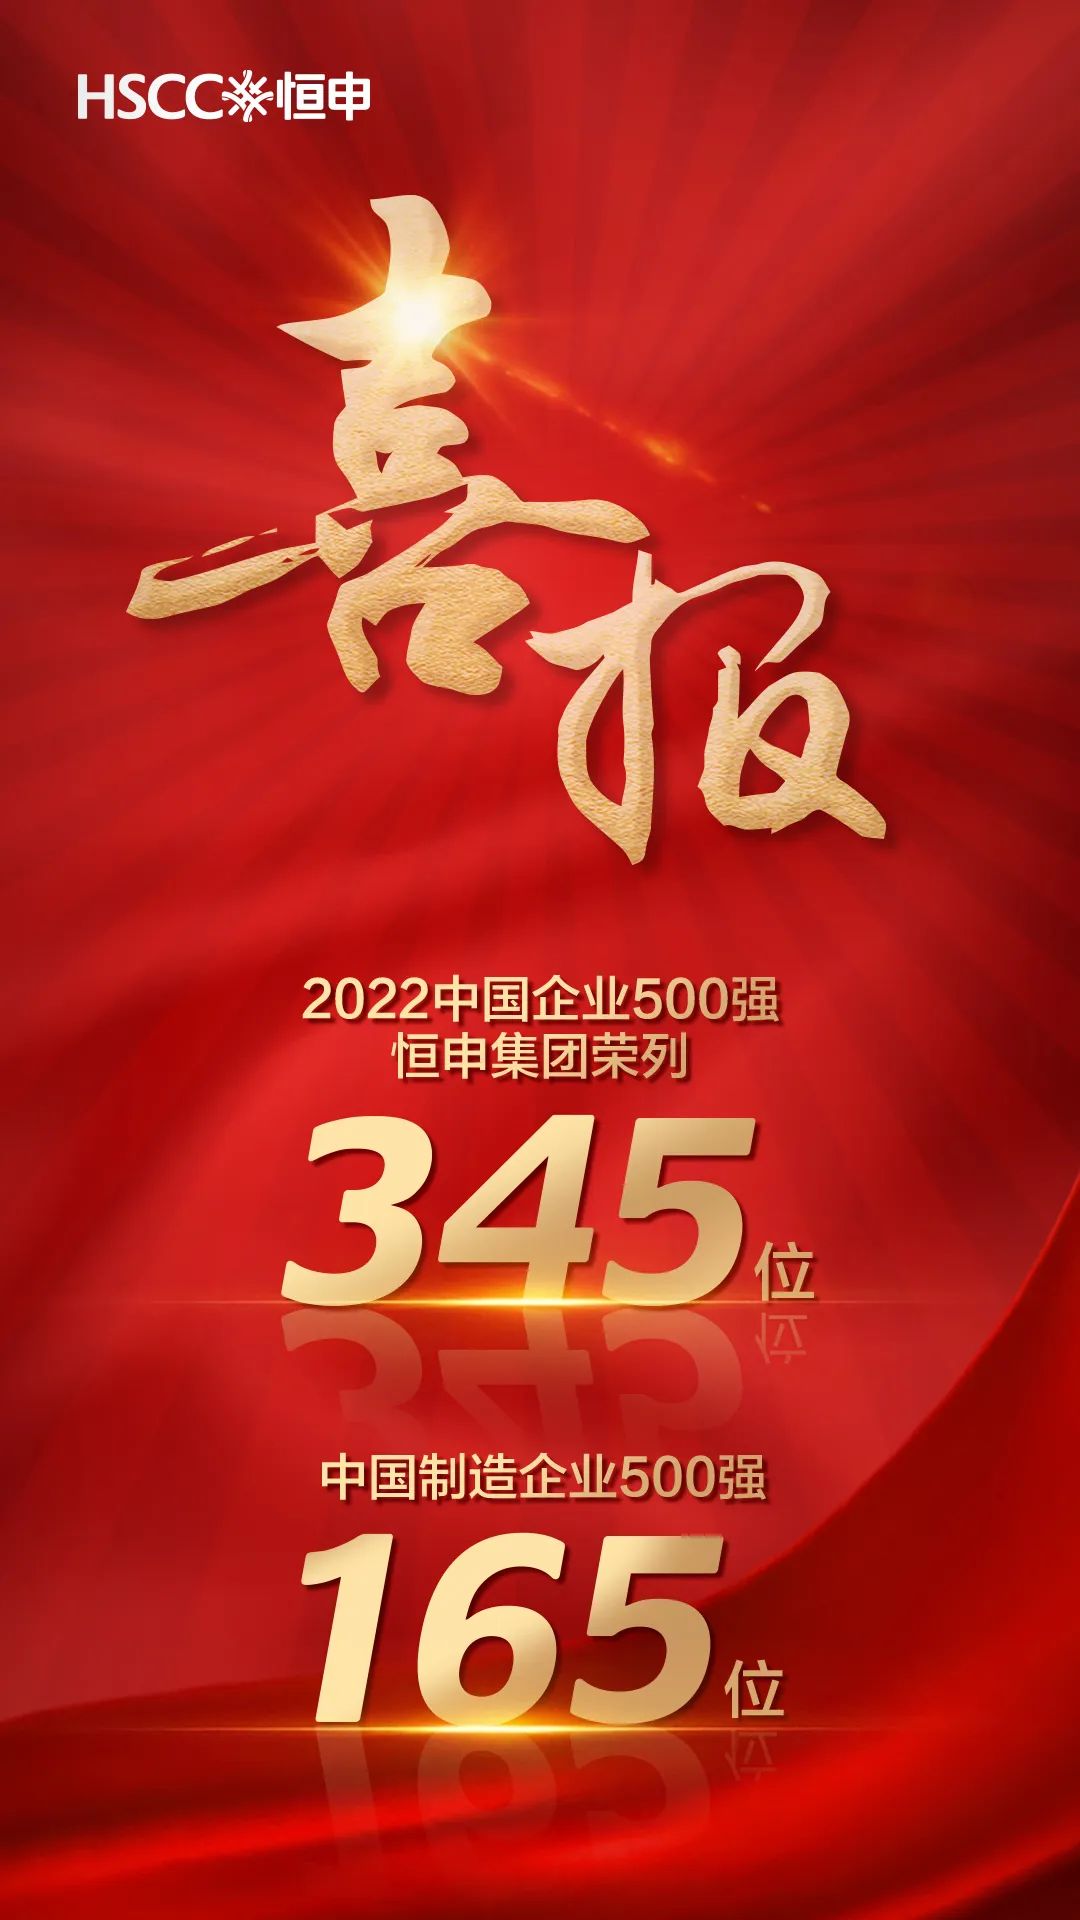 Improve 11 places! HSCC Group ranked 345th on the list of Top 500 Chinese Enterprises in 2022 